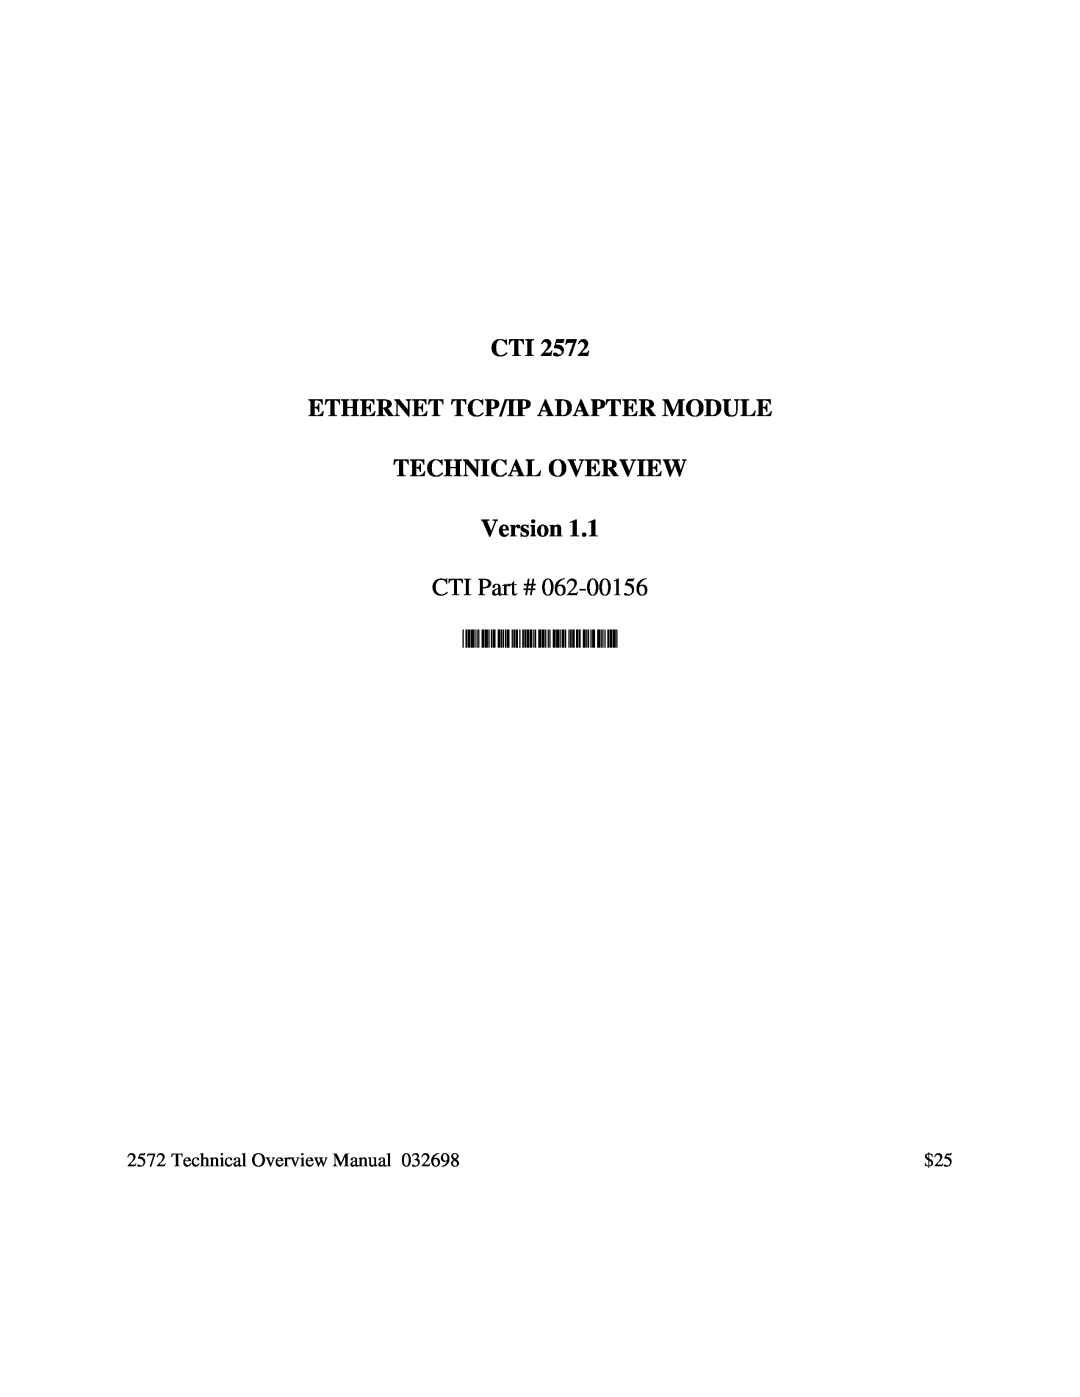 IBM CTI 2572 manual CTI ETHERNET TCP/IP ADAPTER MODULE TECHNICAL OVERVIEW Version, Technical Overview Manual 